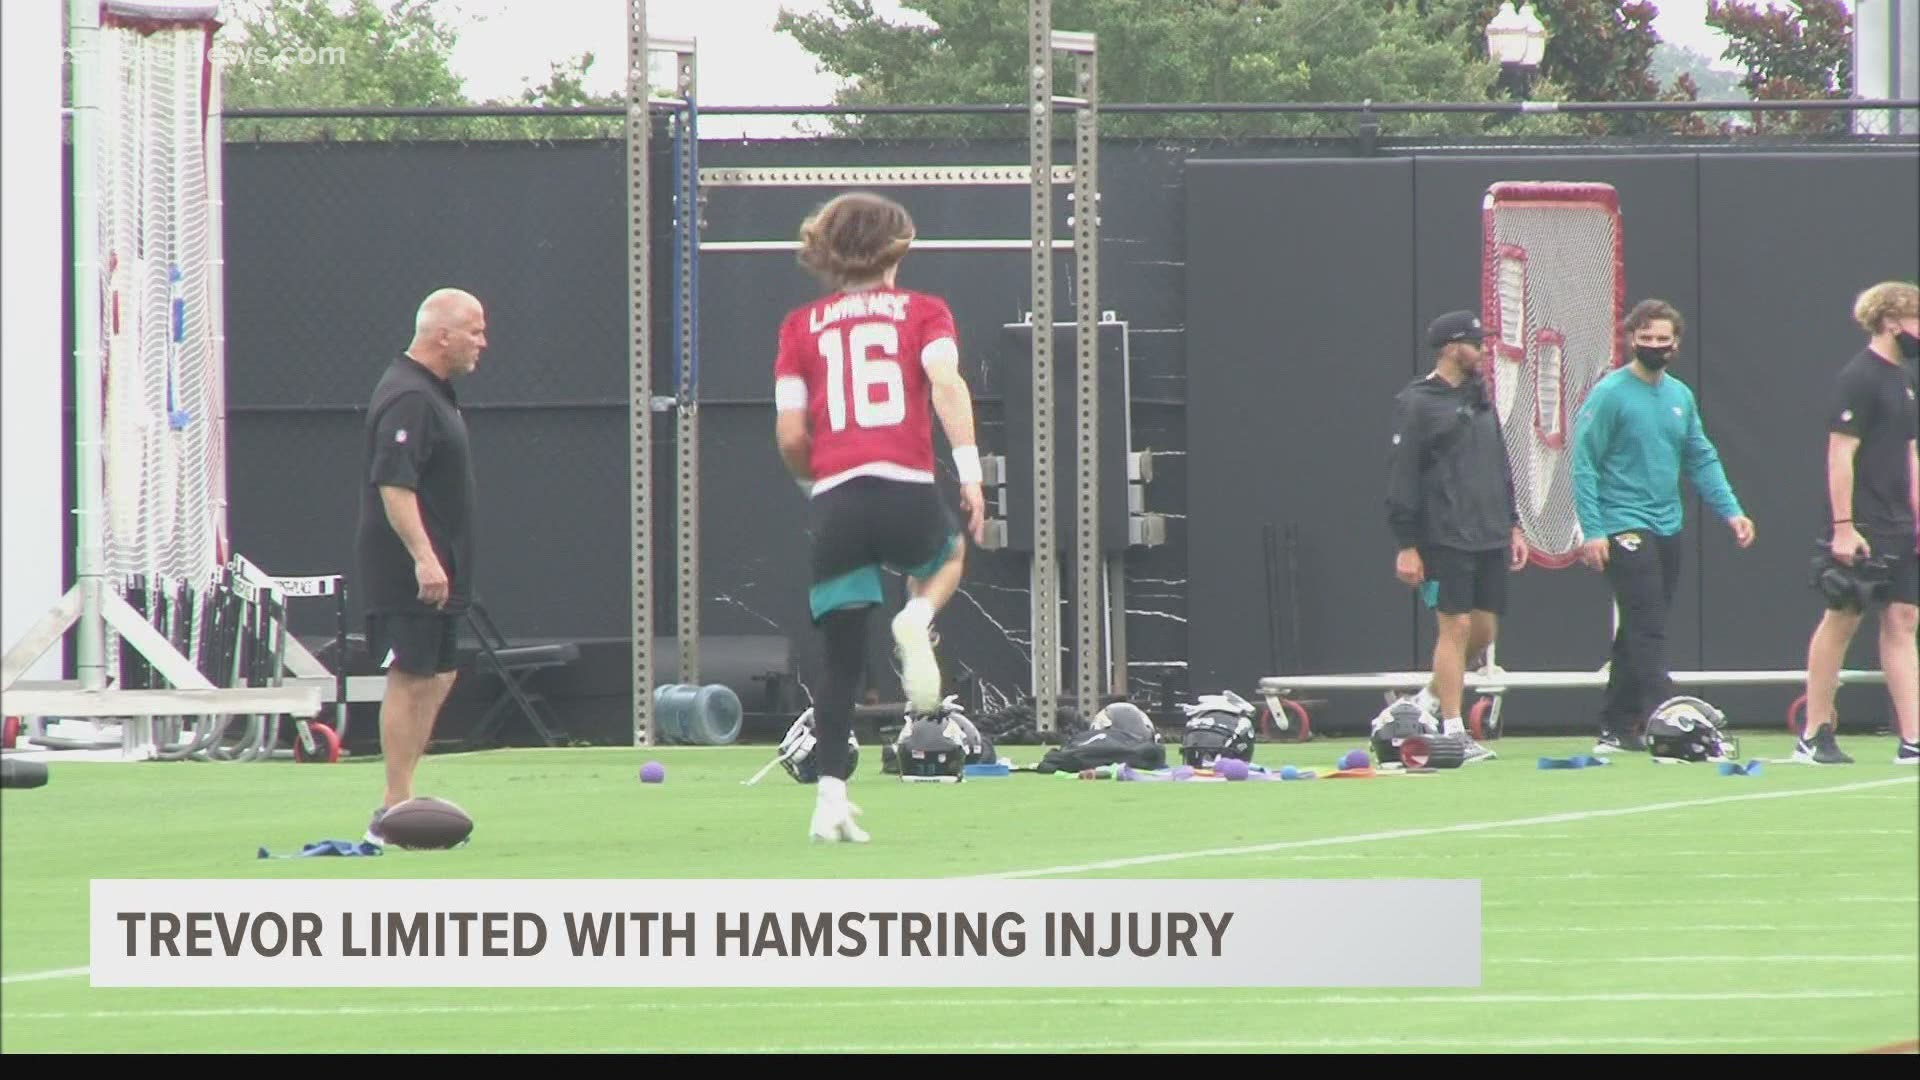 His teammates say they aren't concerned that the injury will be anything significant.